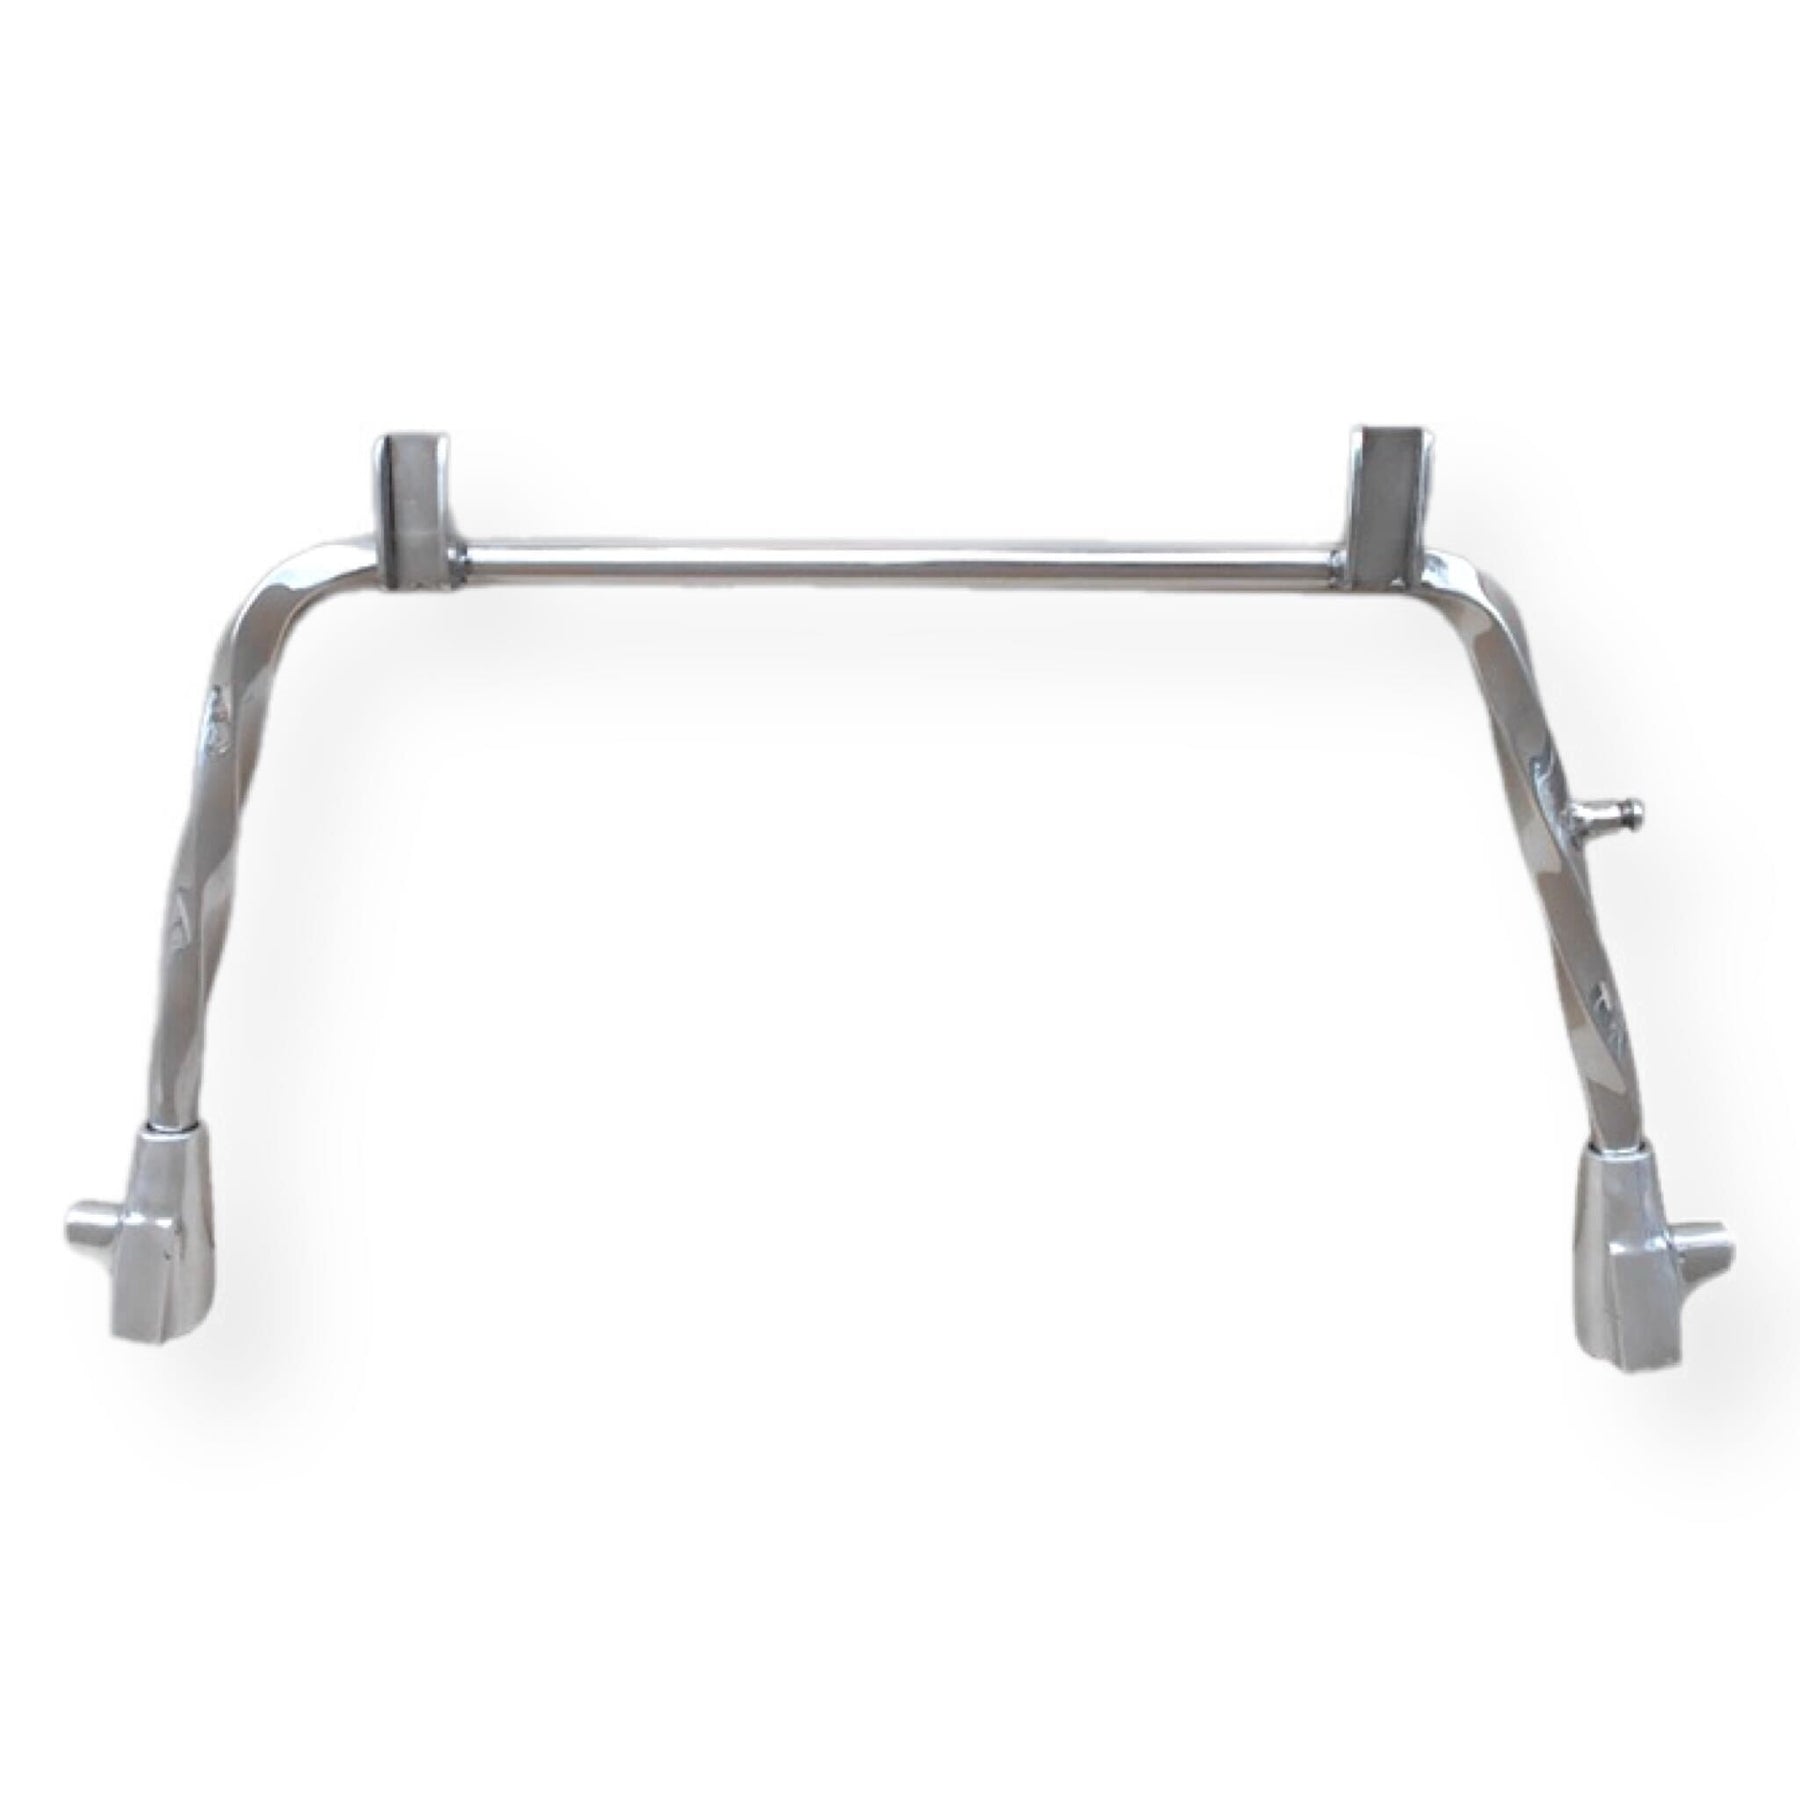 Lambretta - Centre Stand - Twisted - Series 3 - Standard Feet Type - Stainless Steel